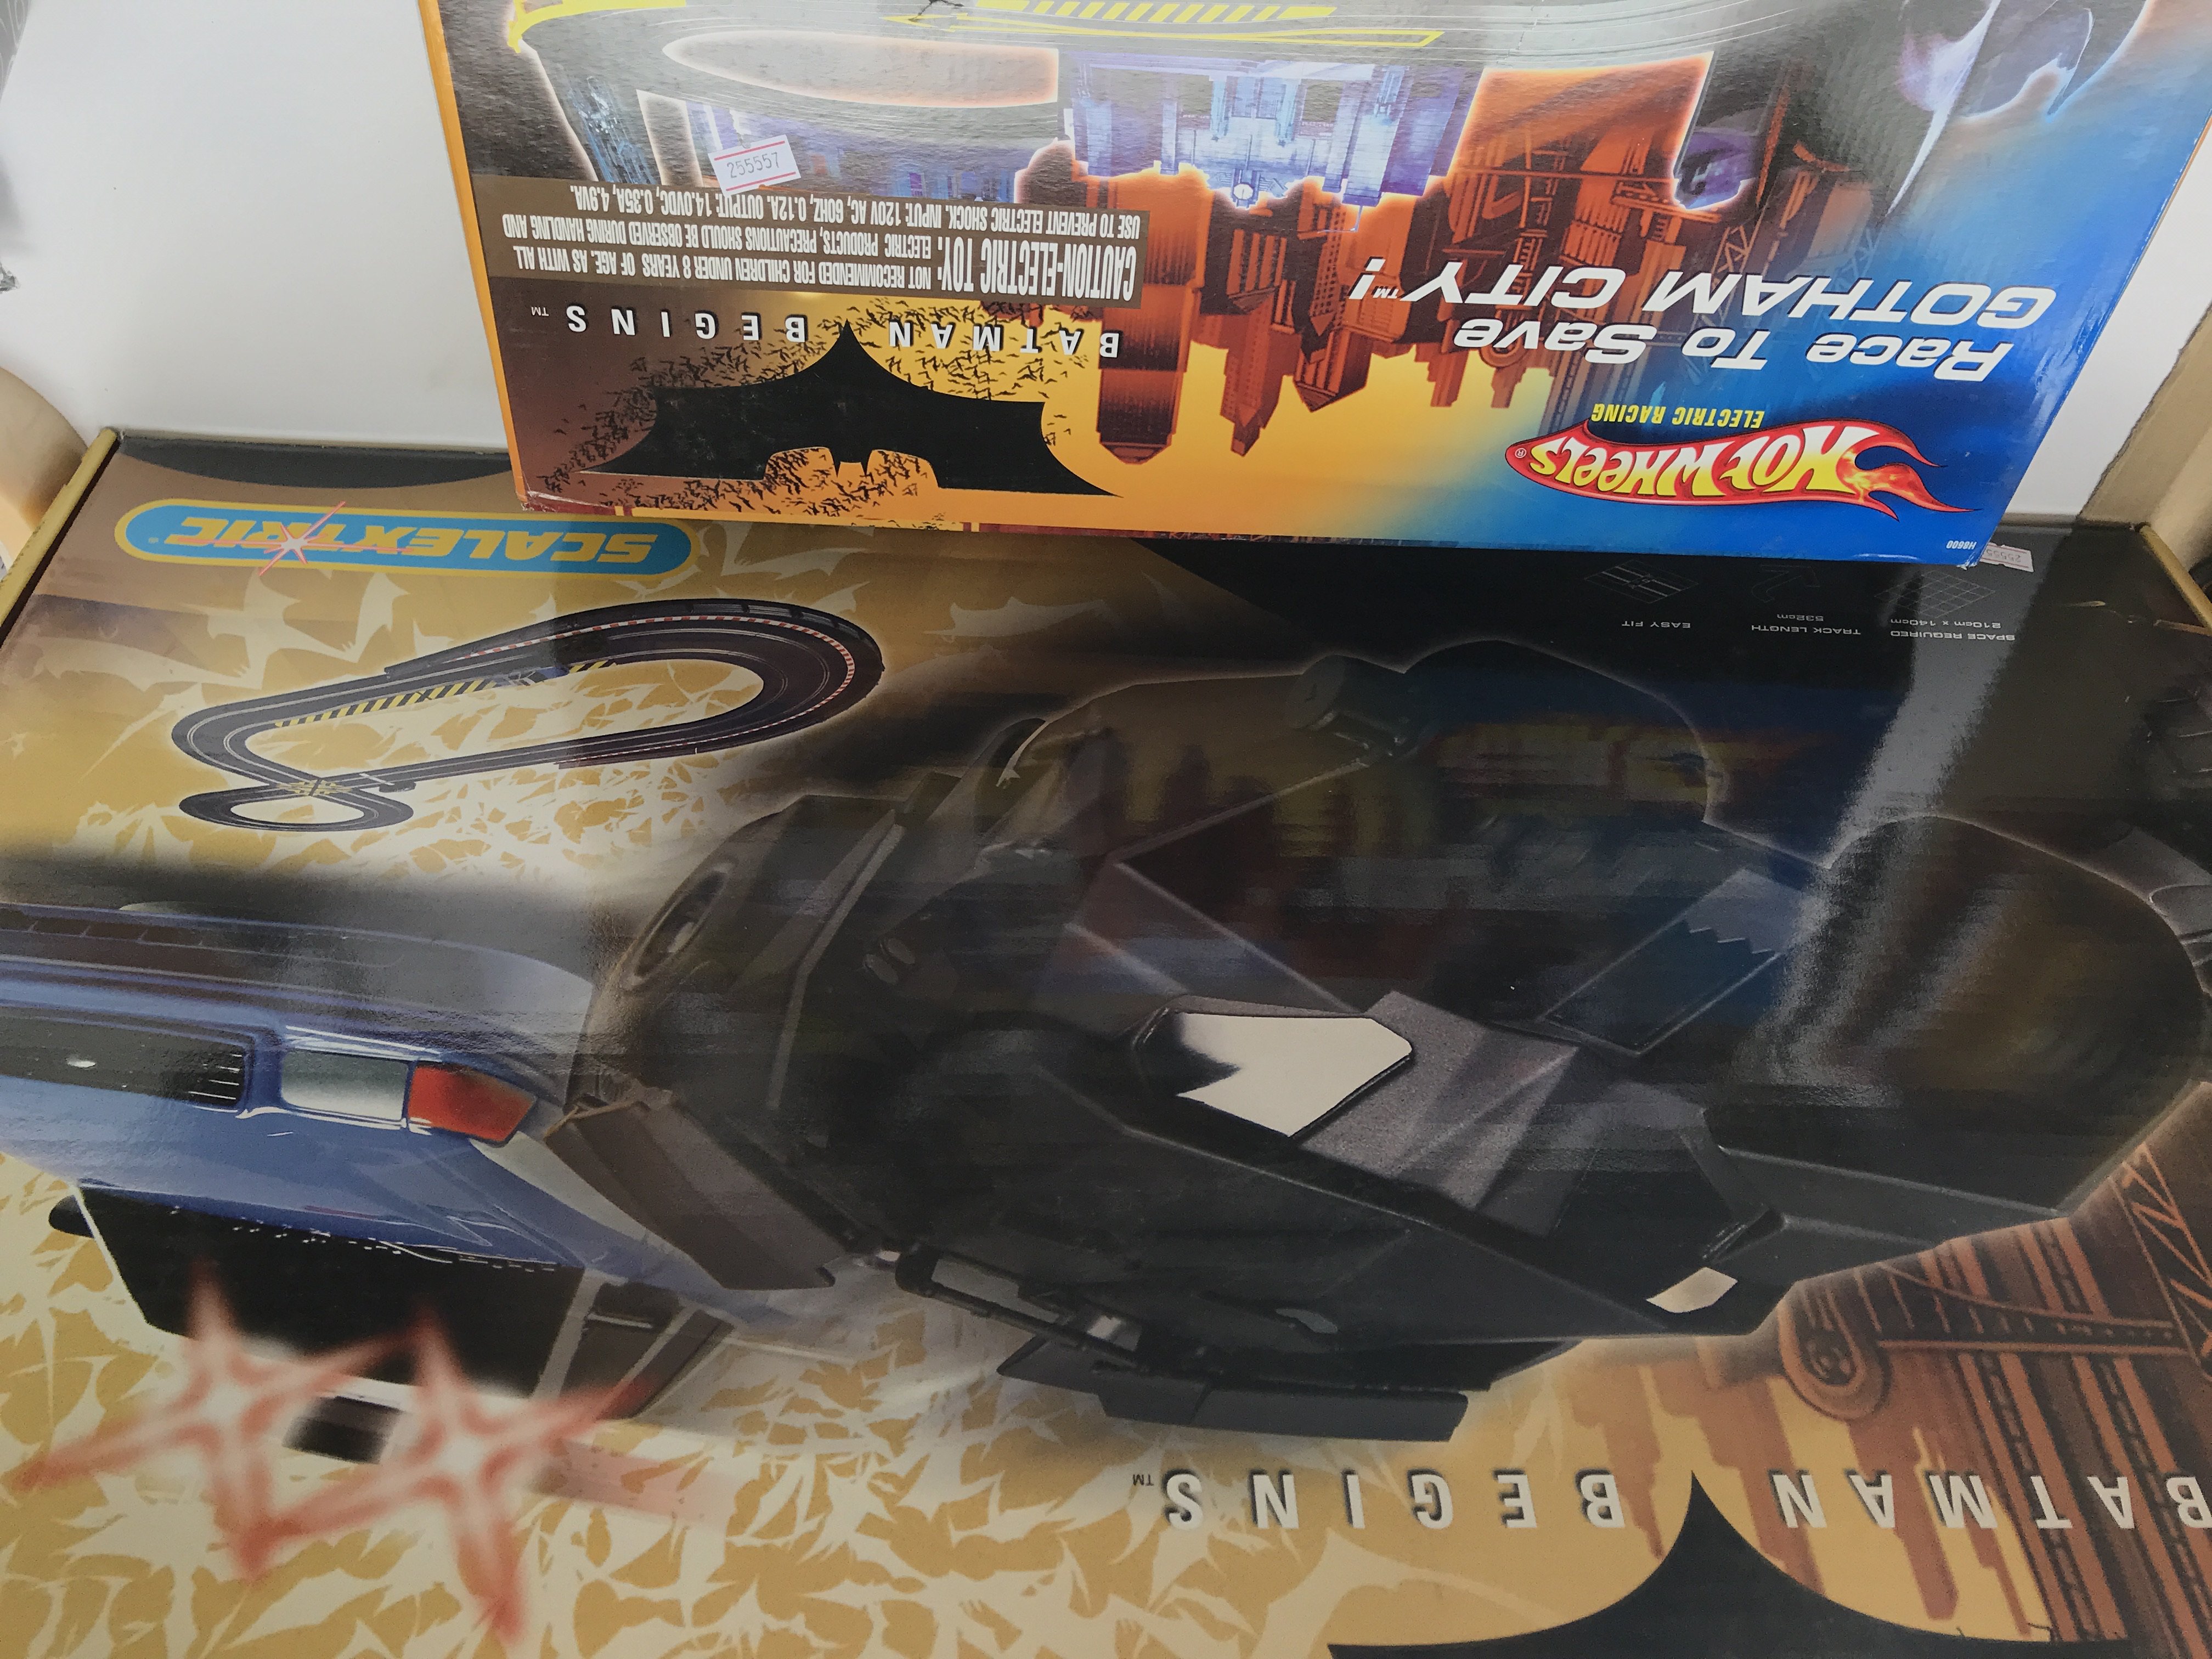 A Batman Begins Scalextric Set (Sealed) and a Hotw